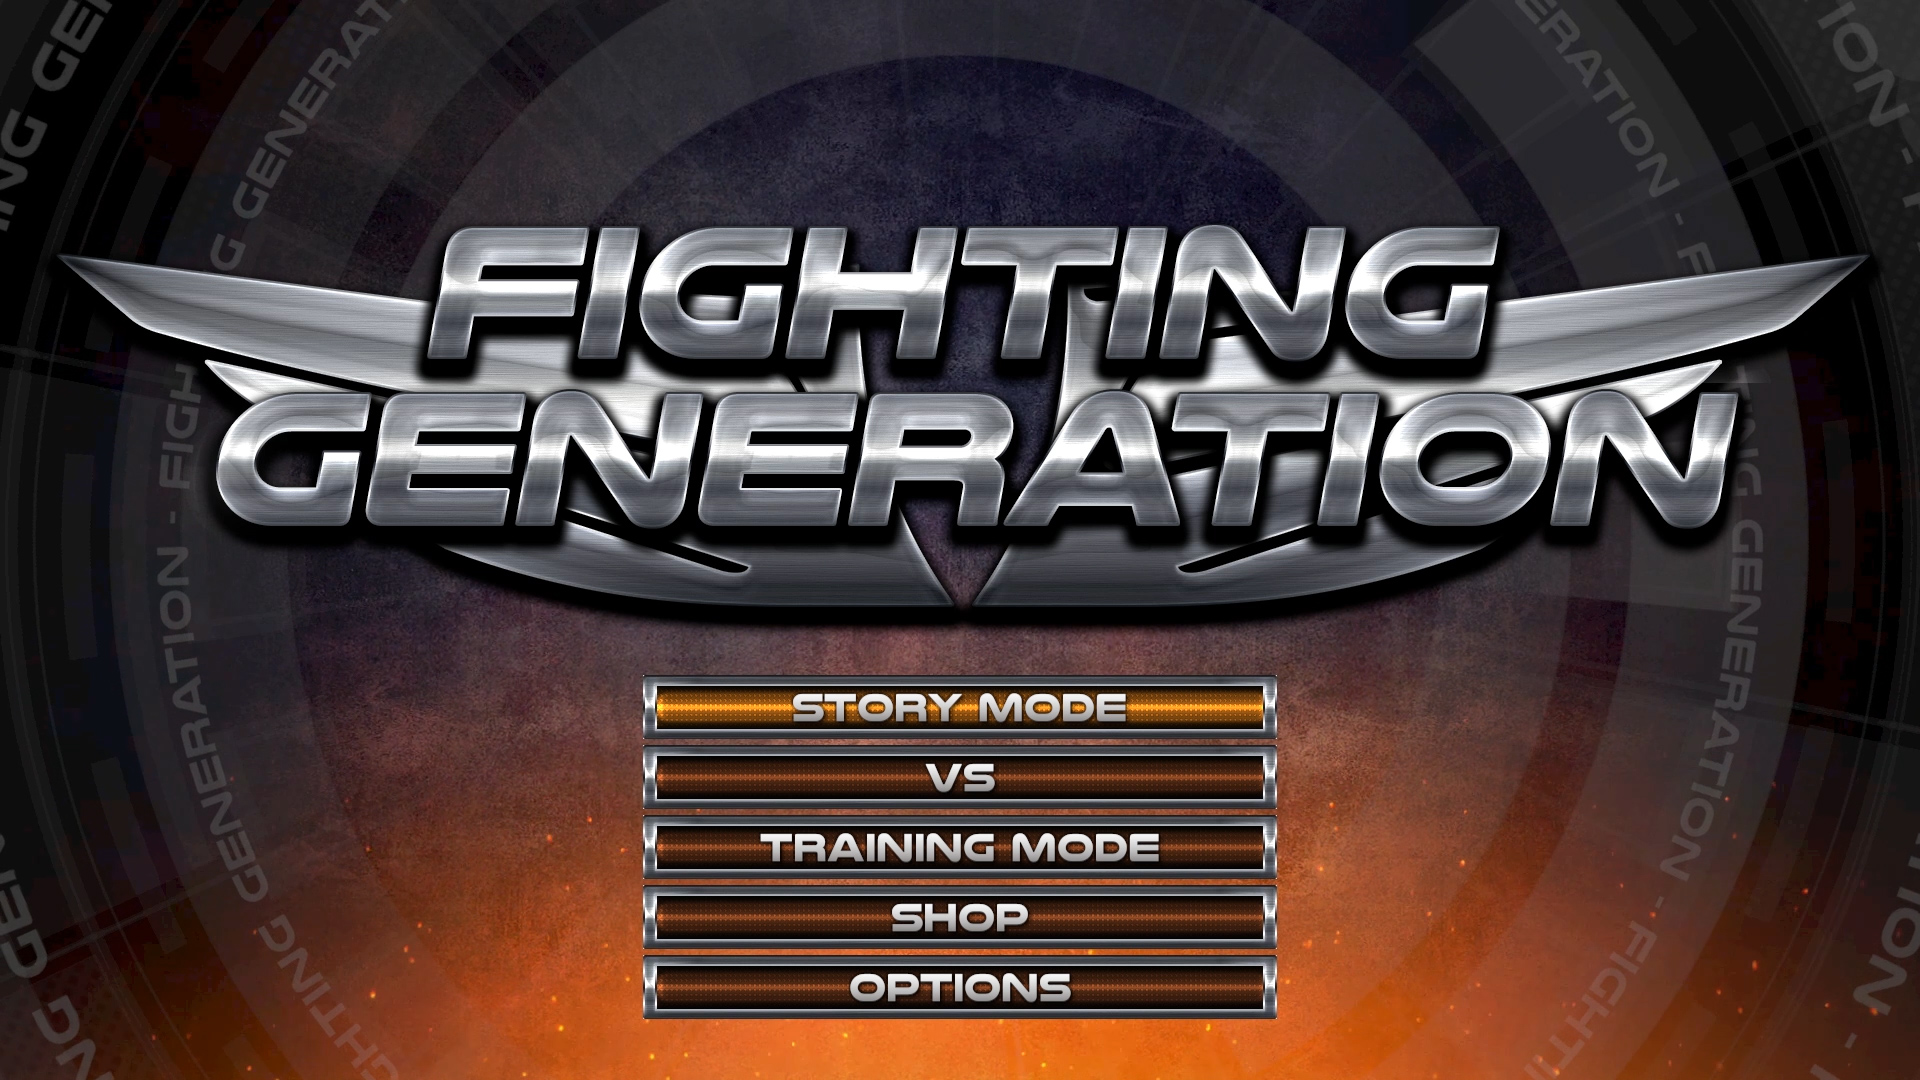 The Fighters Generation - How it started: How its going